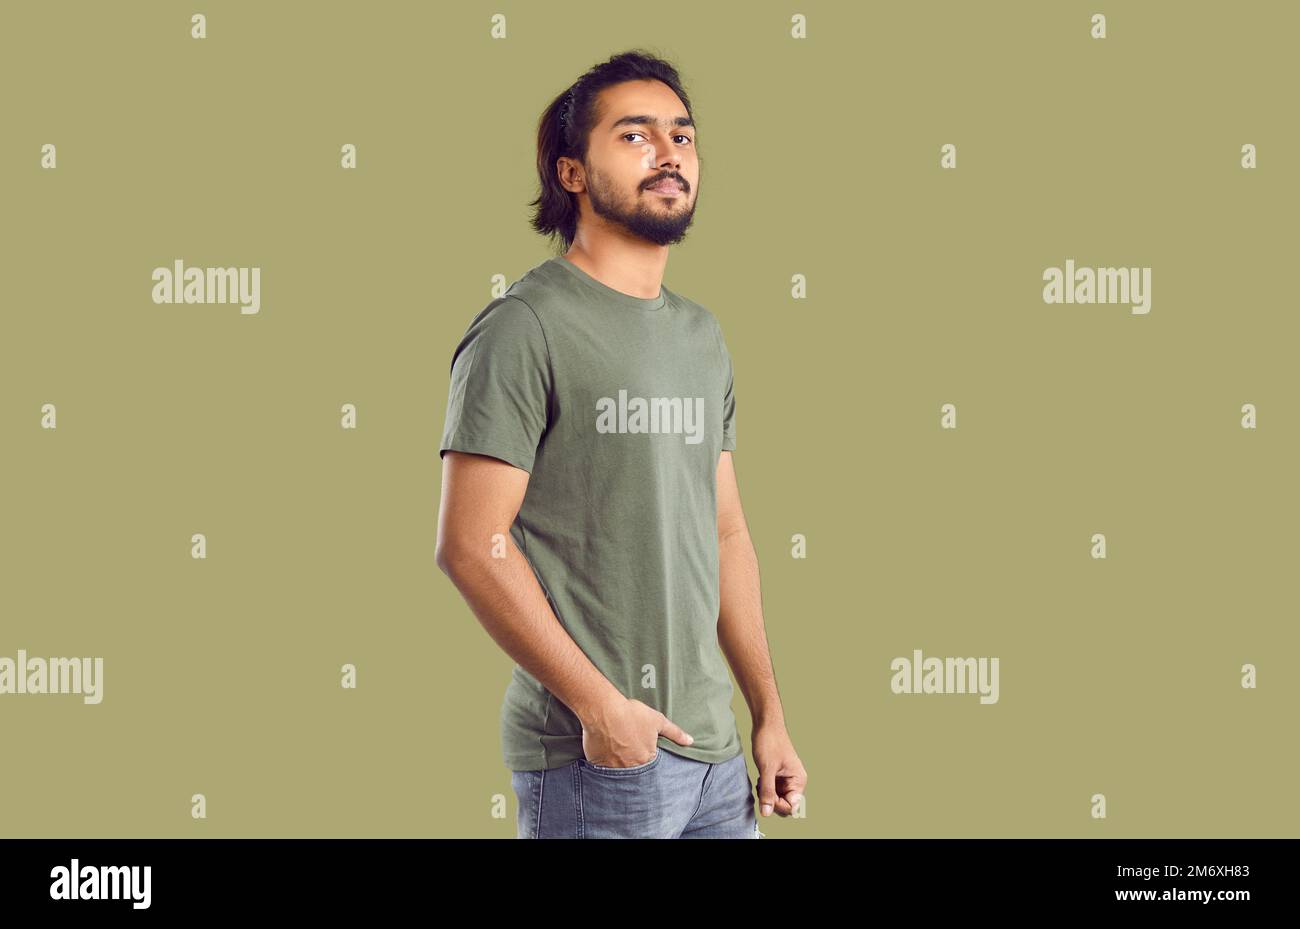 Handsome, confident and proud Indian young man in casual clothes on khaki background. Stock Photo